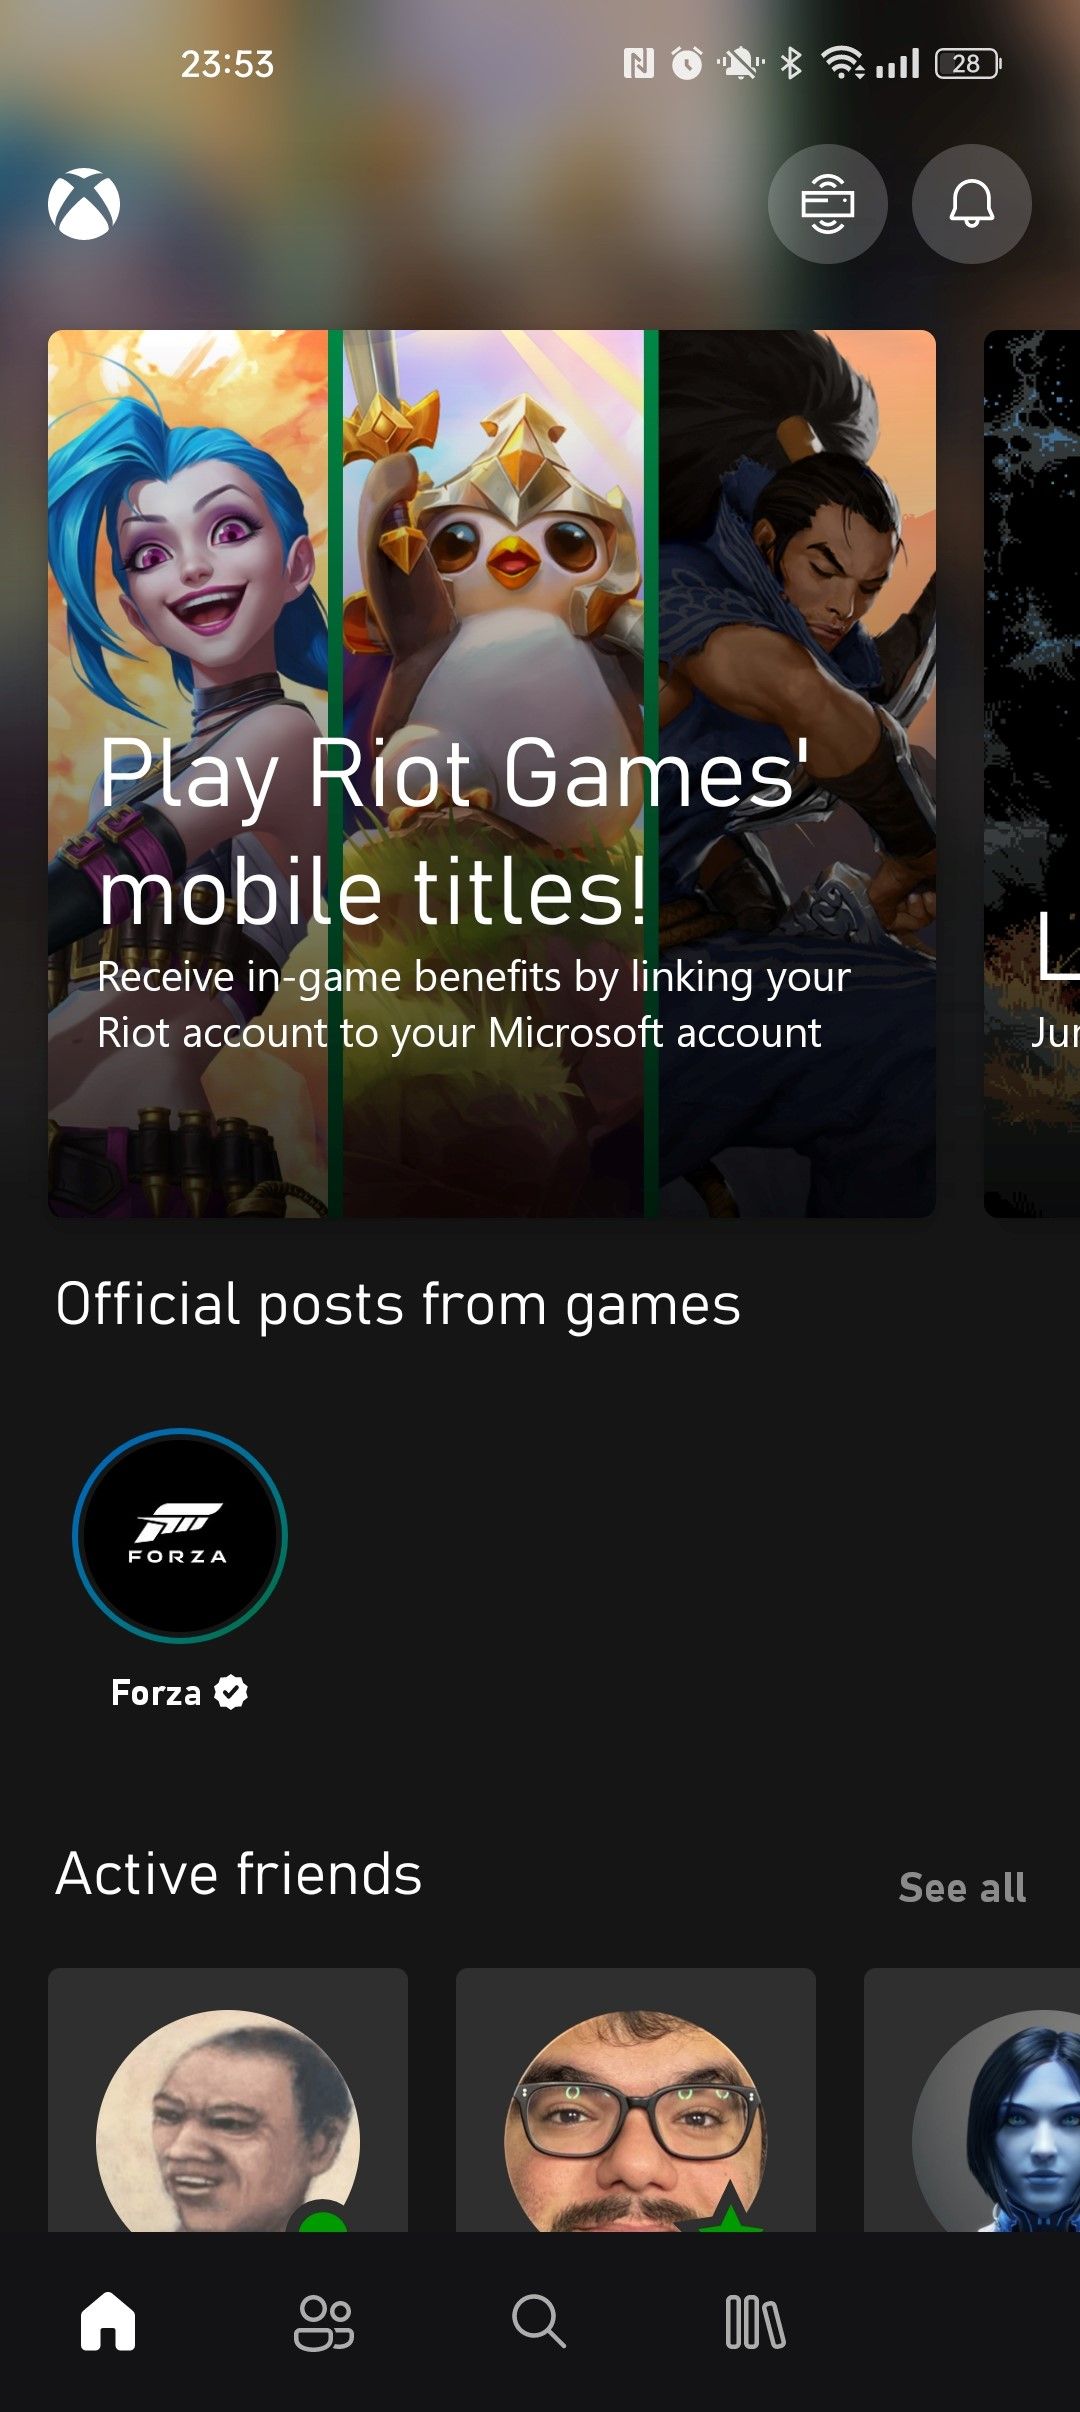 A mobile screenshot of the Home screen for the Xbox App on Android